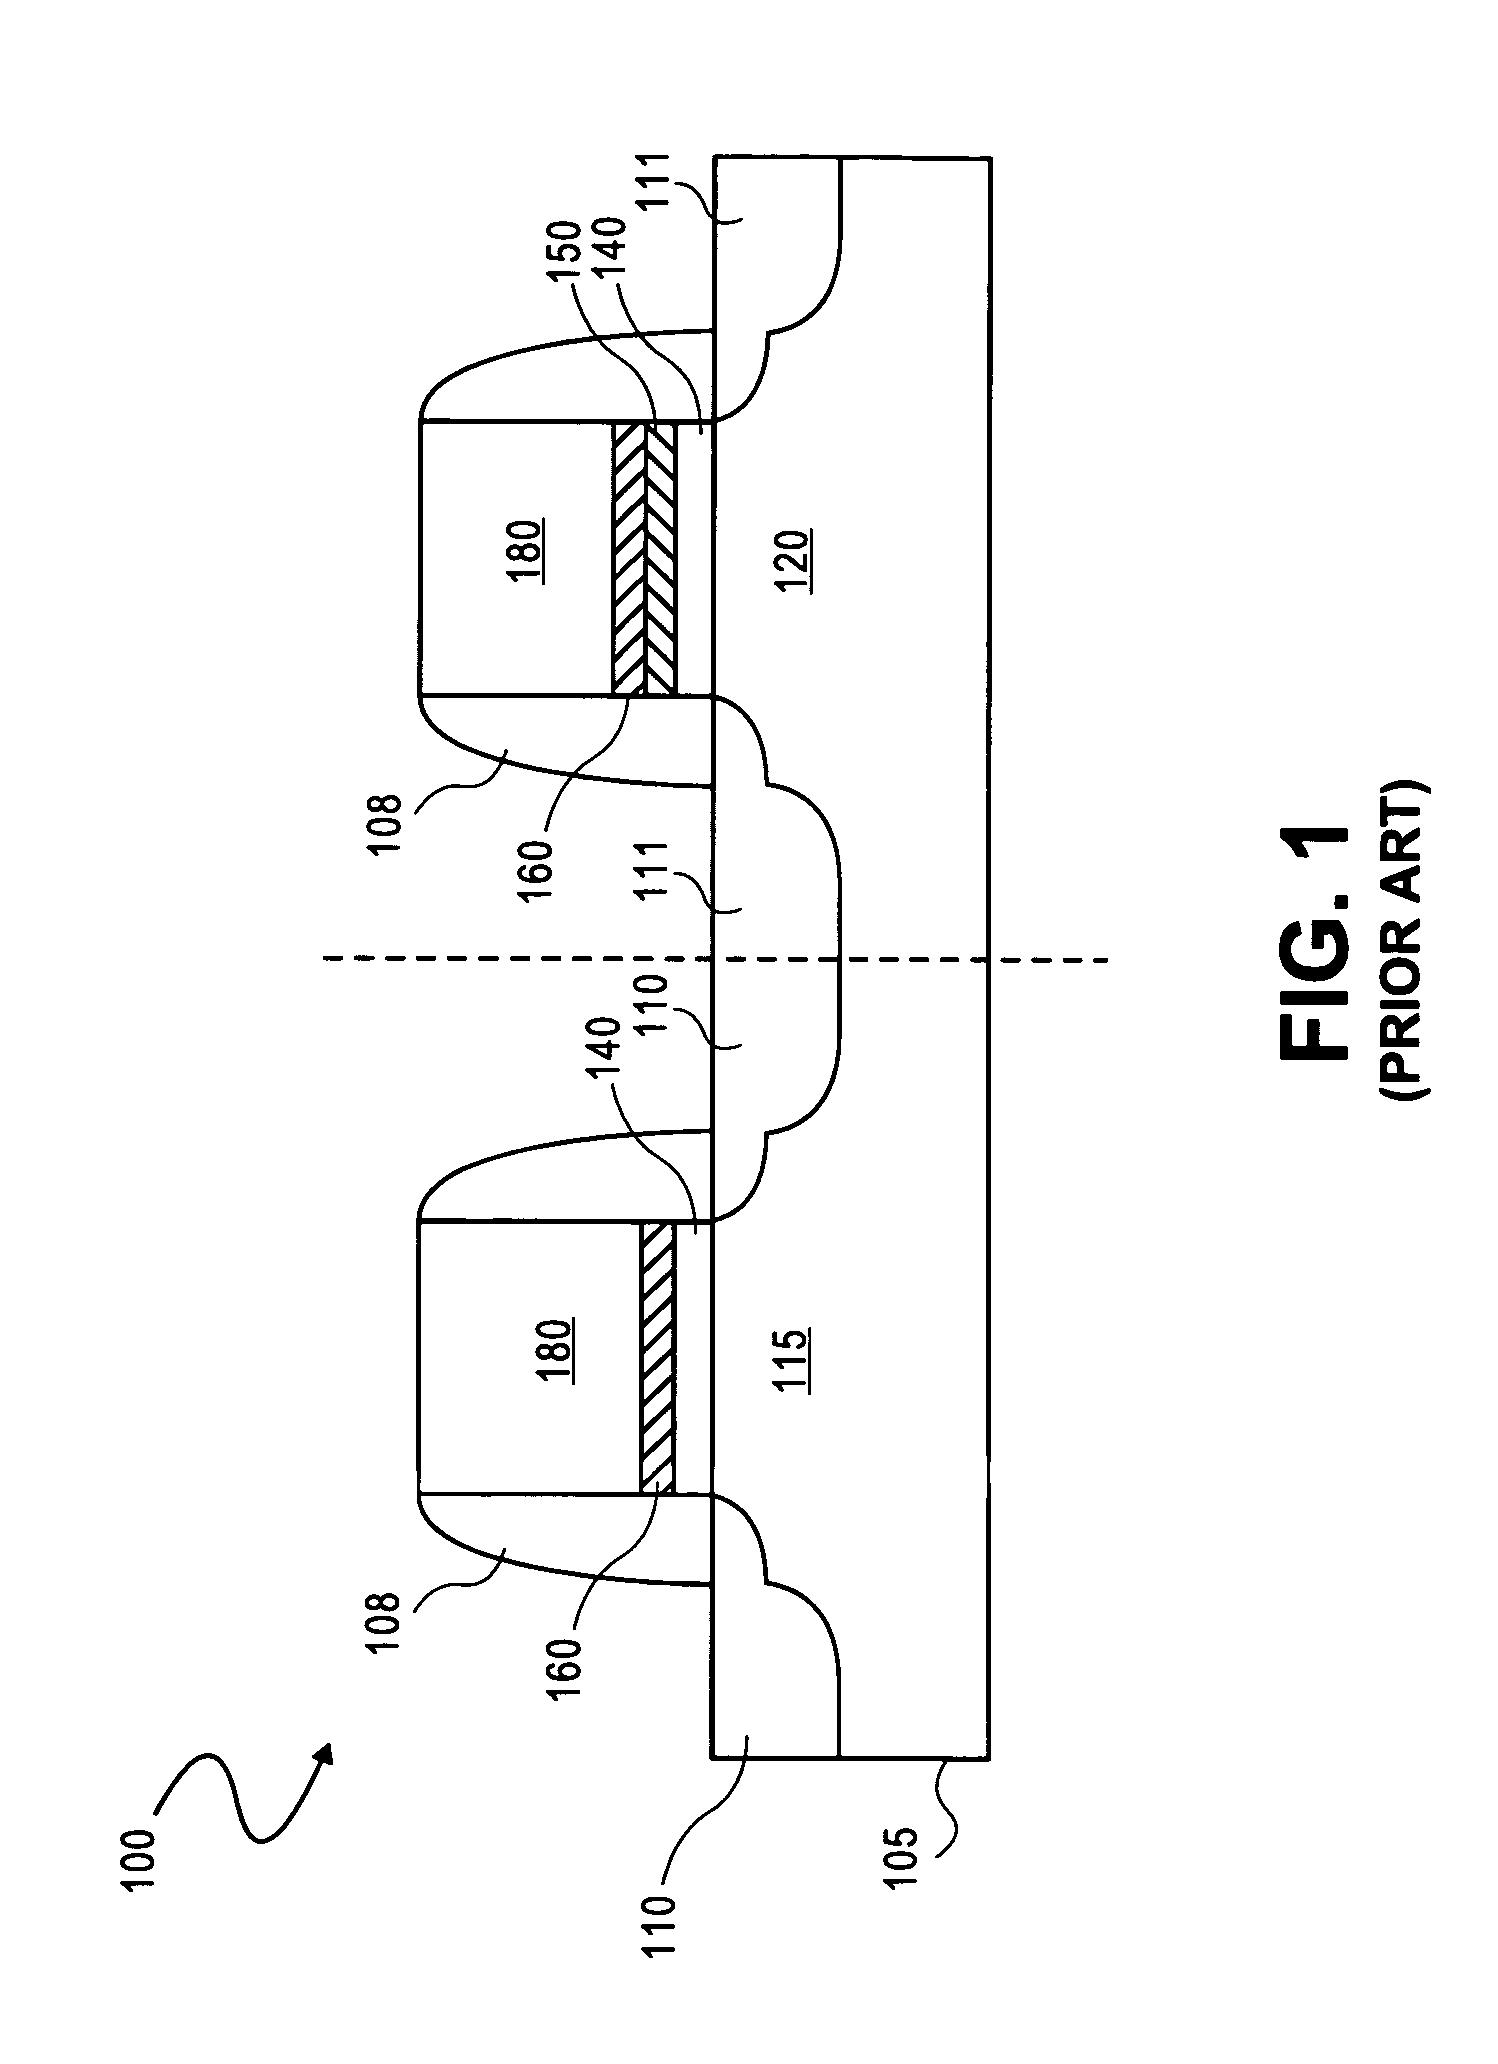 Tunable gate electrode work function material for transistor applications